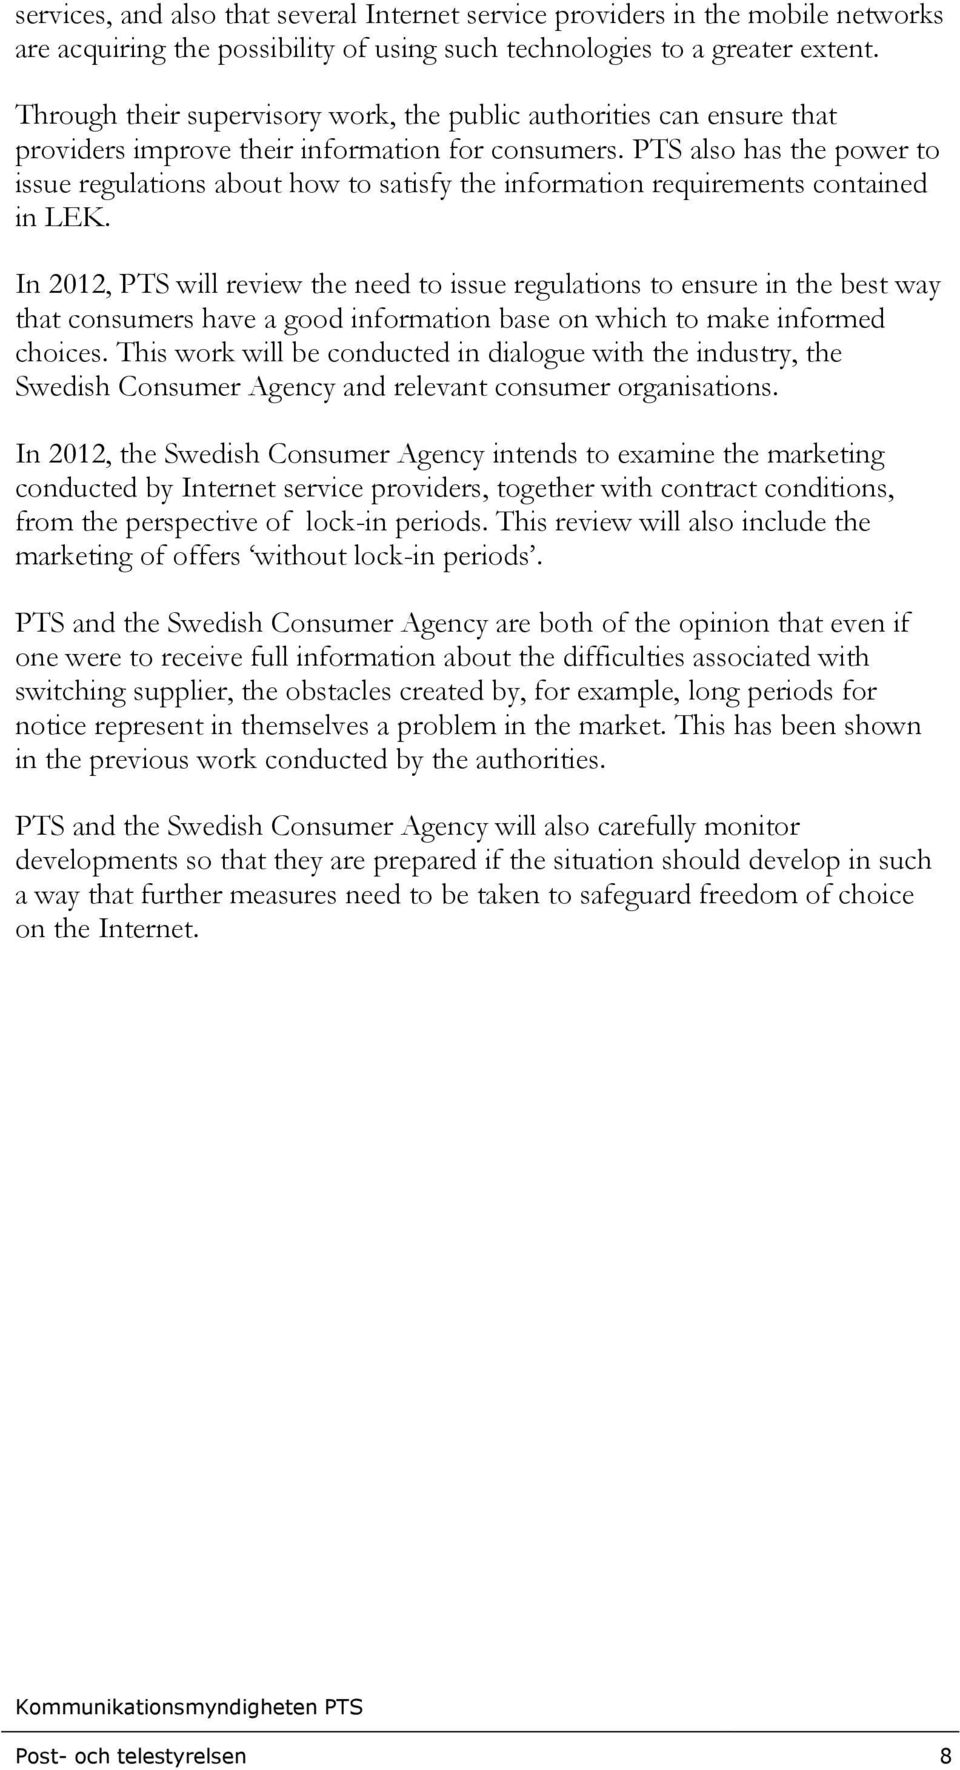 PTS also has the power to issue regulations about how to satisfy the information requirements contained in LEK.